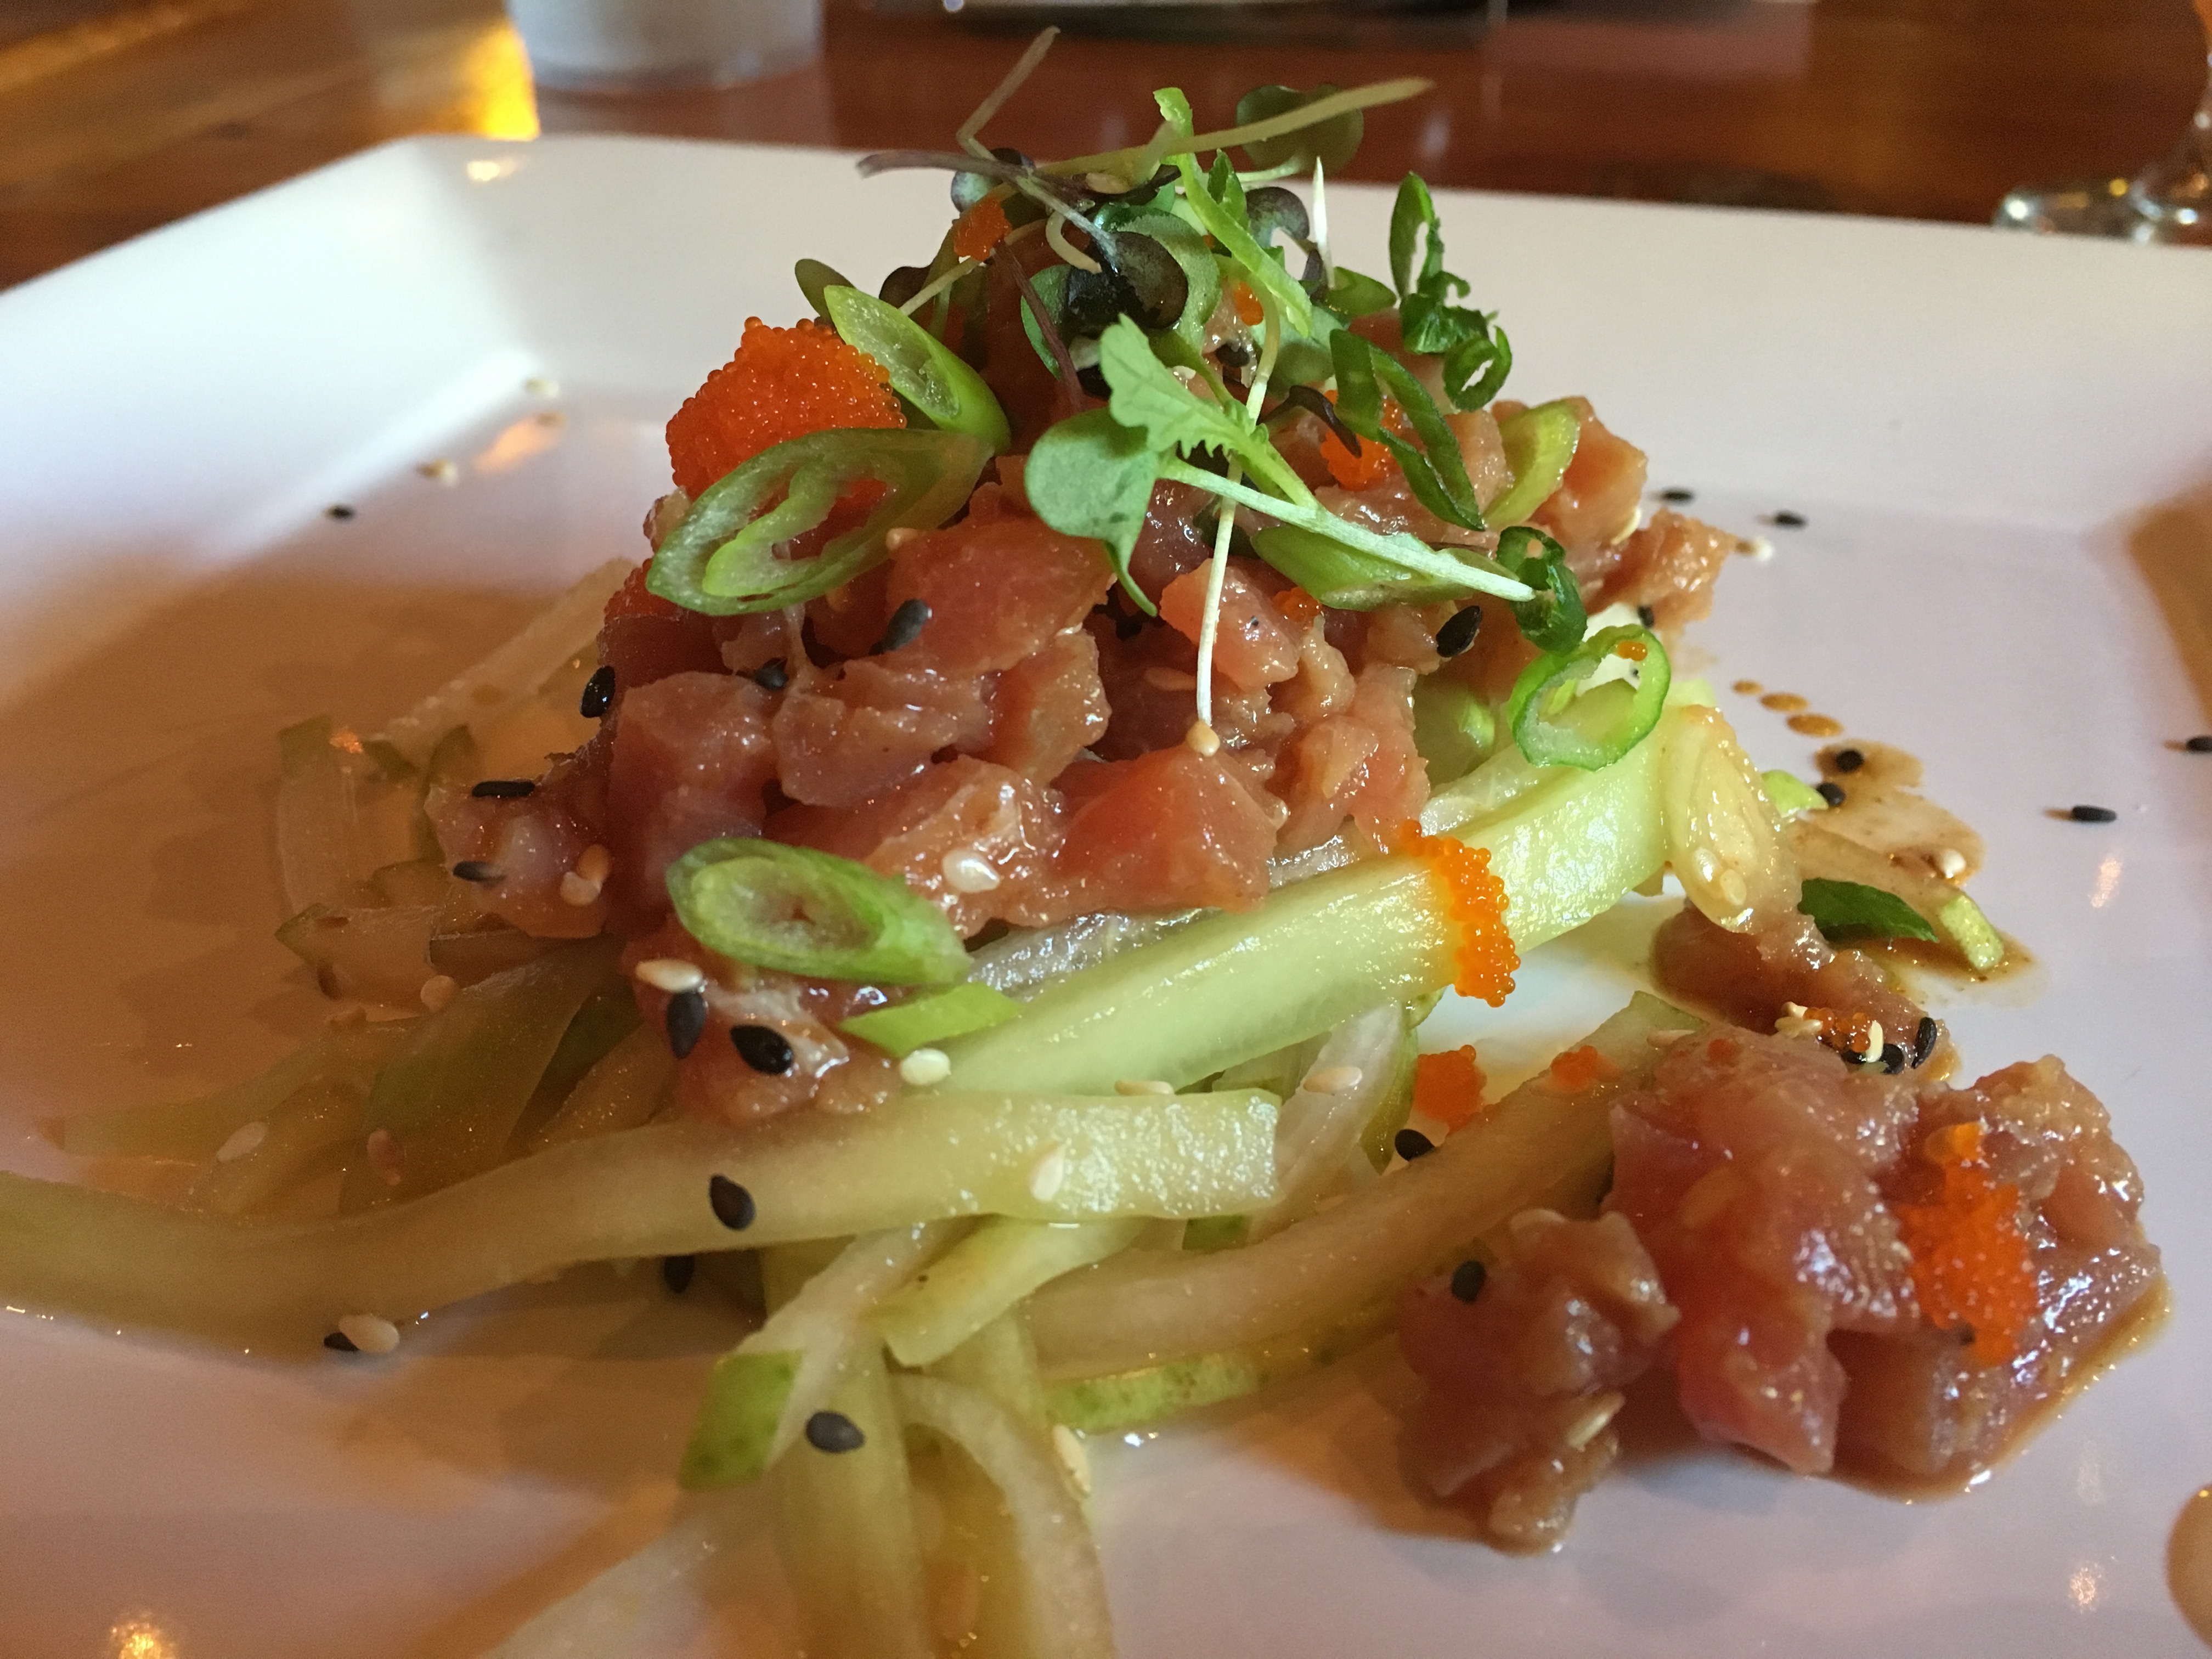 First course will feature this Yellow Fin Ahi Tuna. (photo by D.J. Paul)